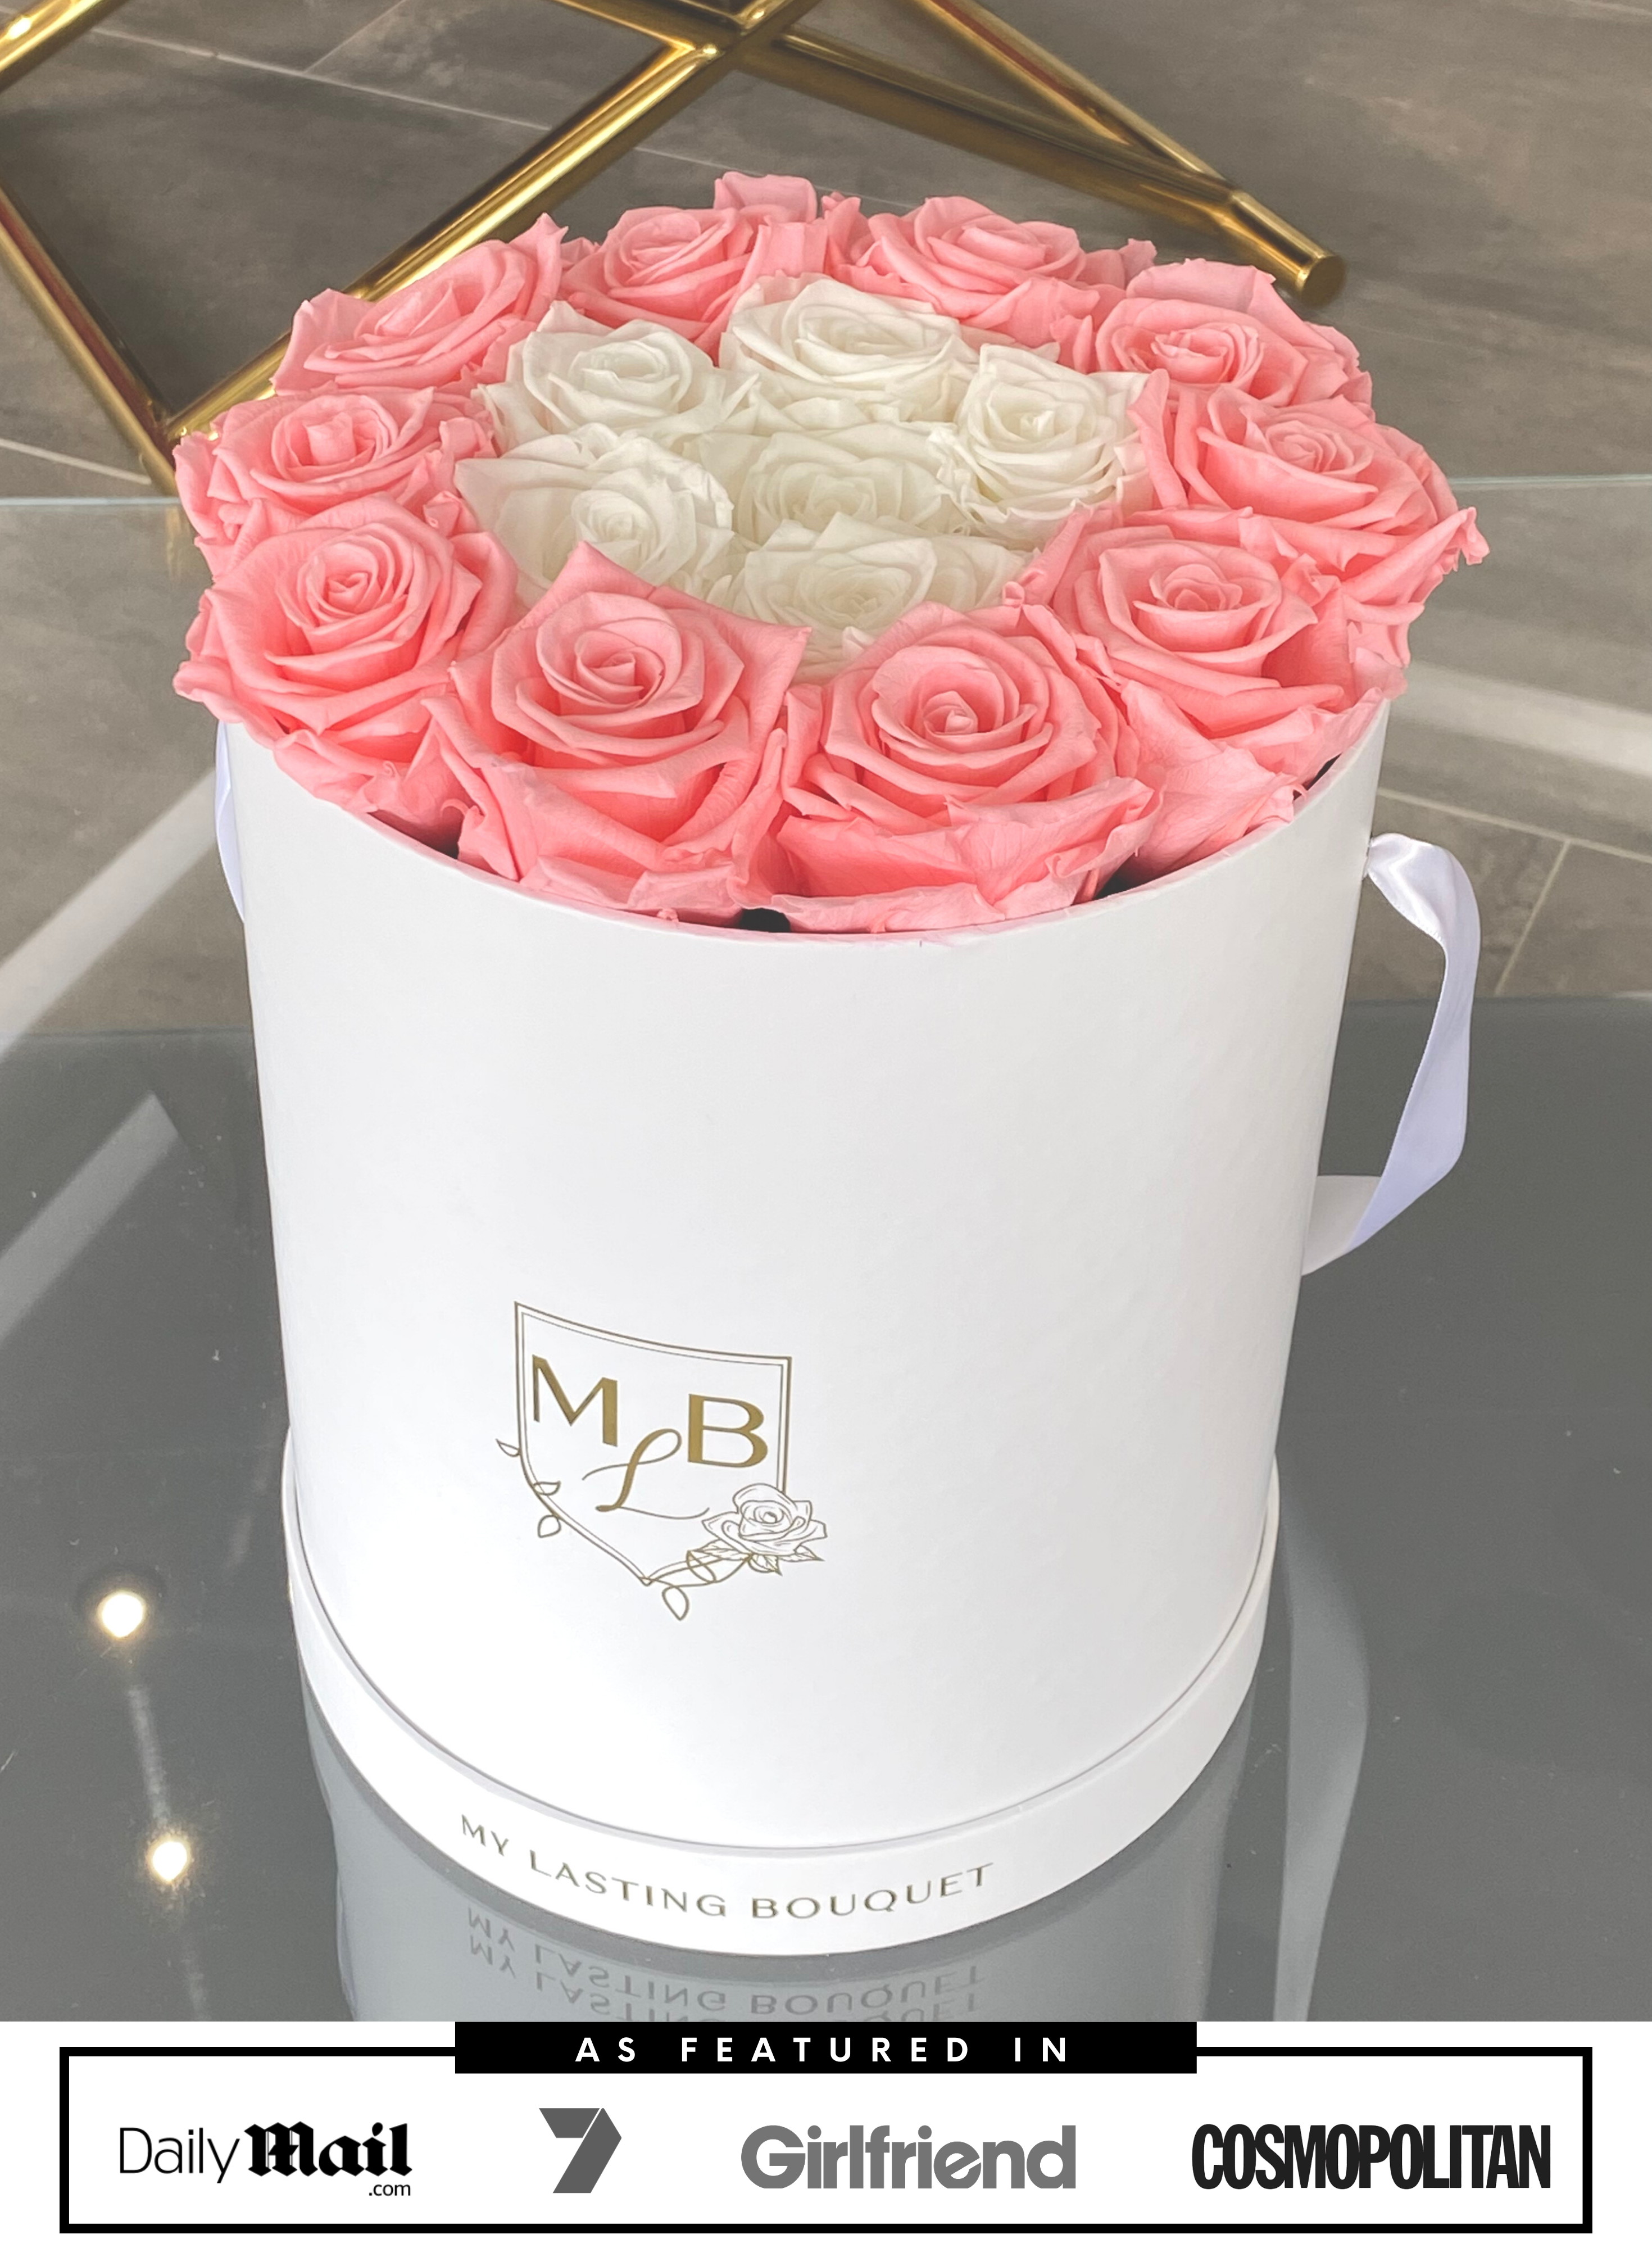 Round Rose Box- Pink & White - My Lasting Bouquet